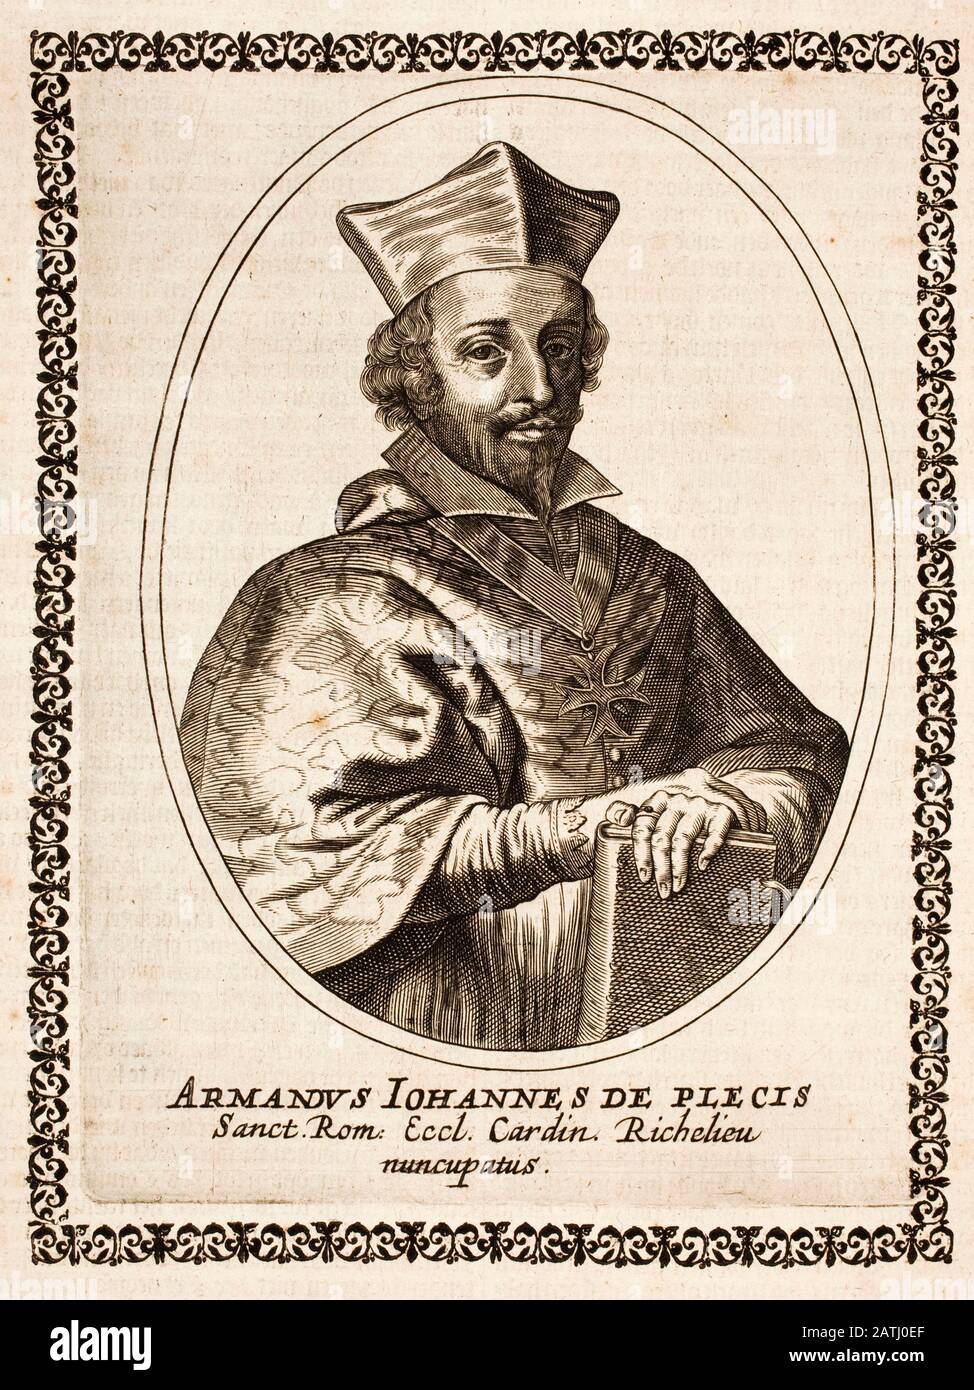 Cardinal Armand Jean du Plessis, Duke of Richelieu (1585 – 1642), commonly referred to as Cardinal Richelieu was a French clergyman and statesman. He Stock Photo